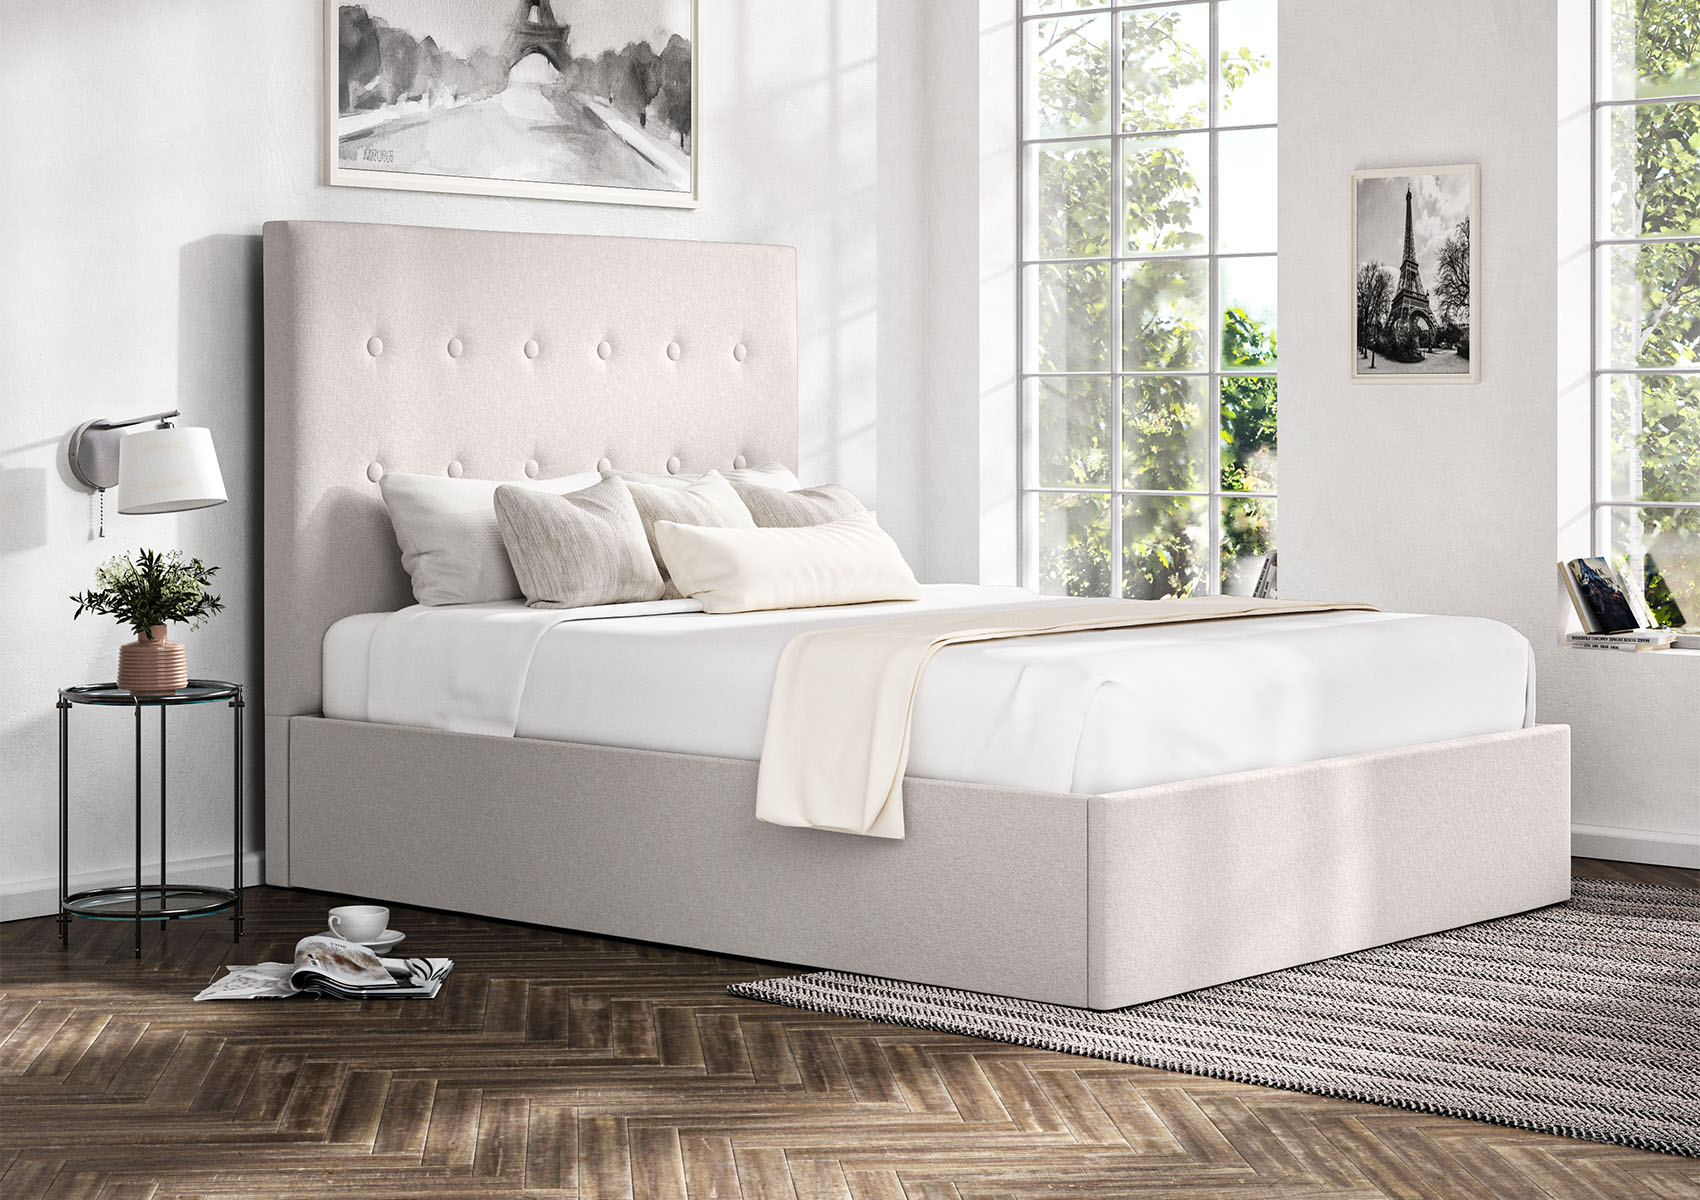 View Piper Arran Natural Upholstered Ottoman Bed Frame Only Time4Sleep information